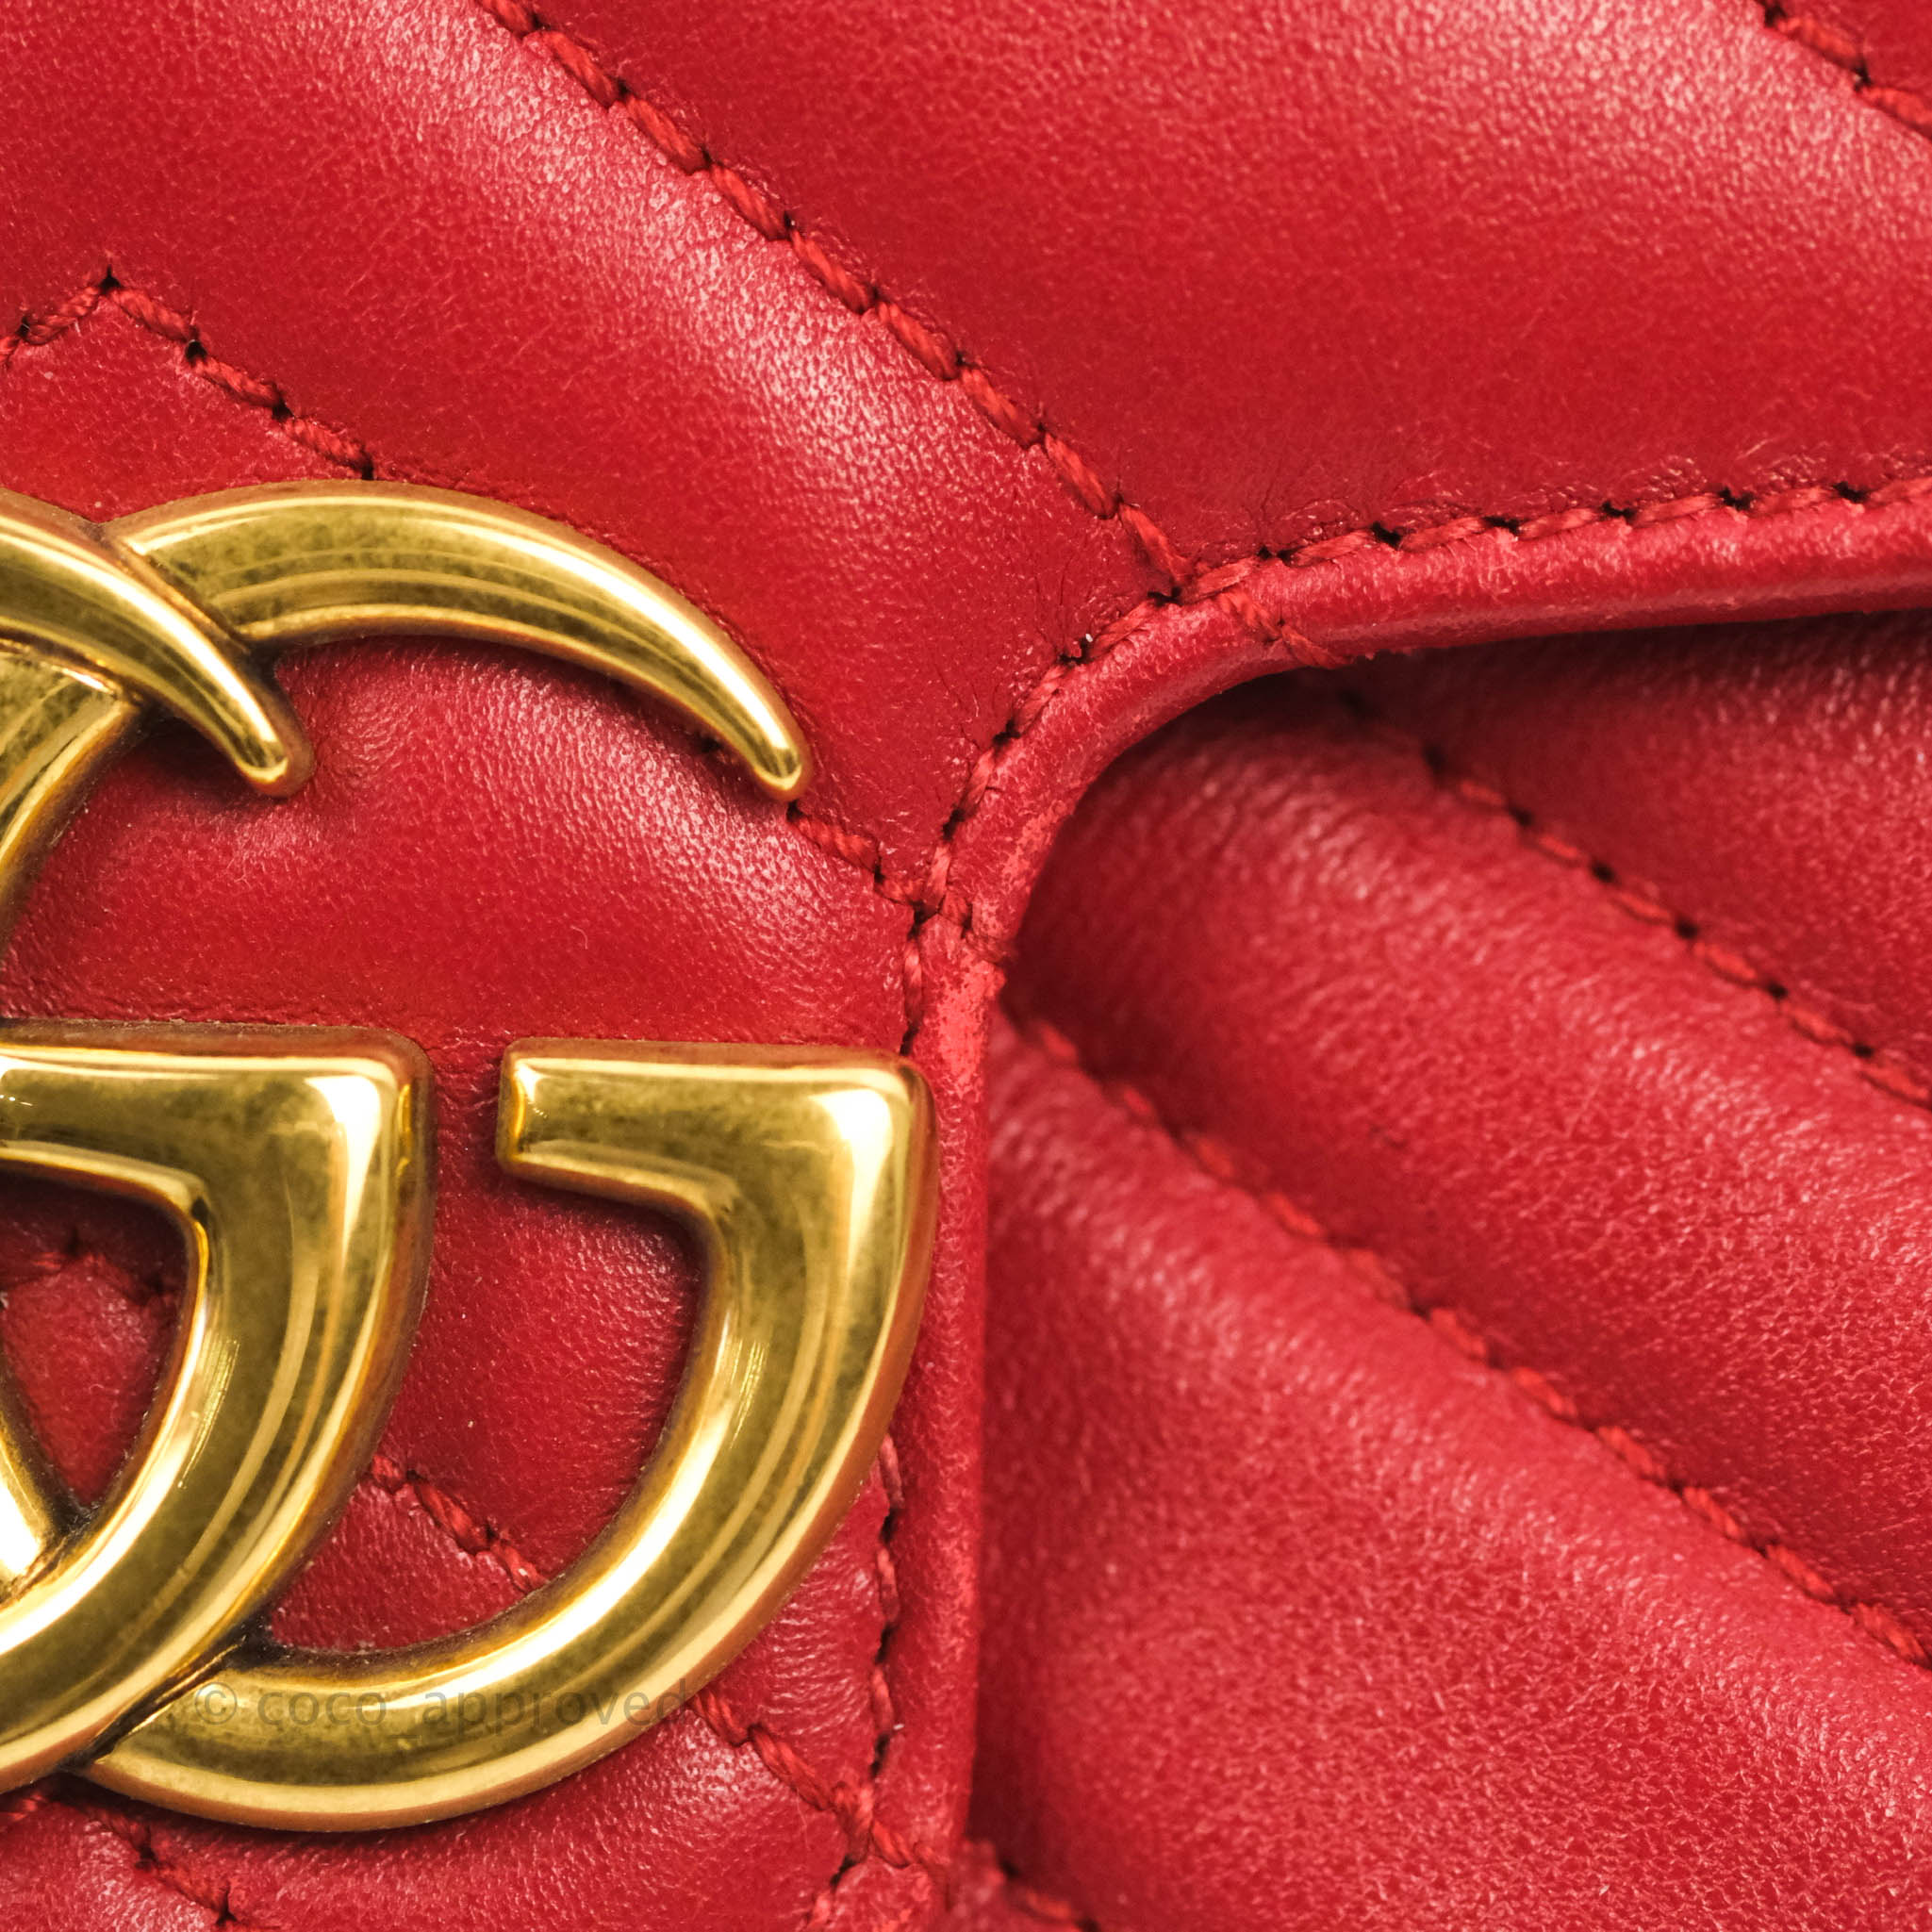 GG Marmont matelassé small shoulder bag in red leather